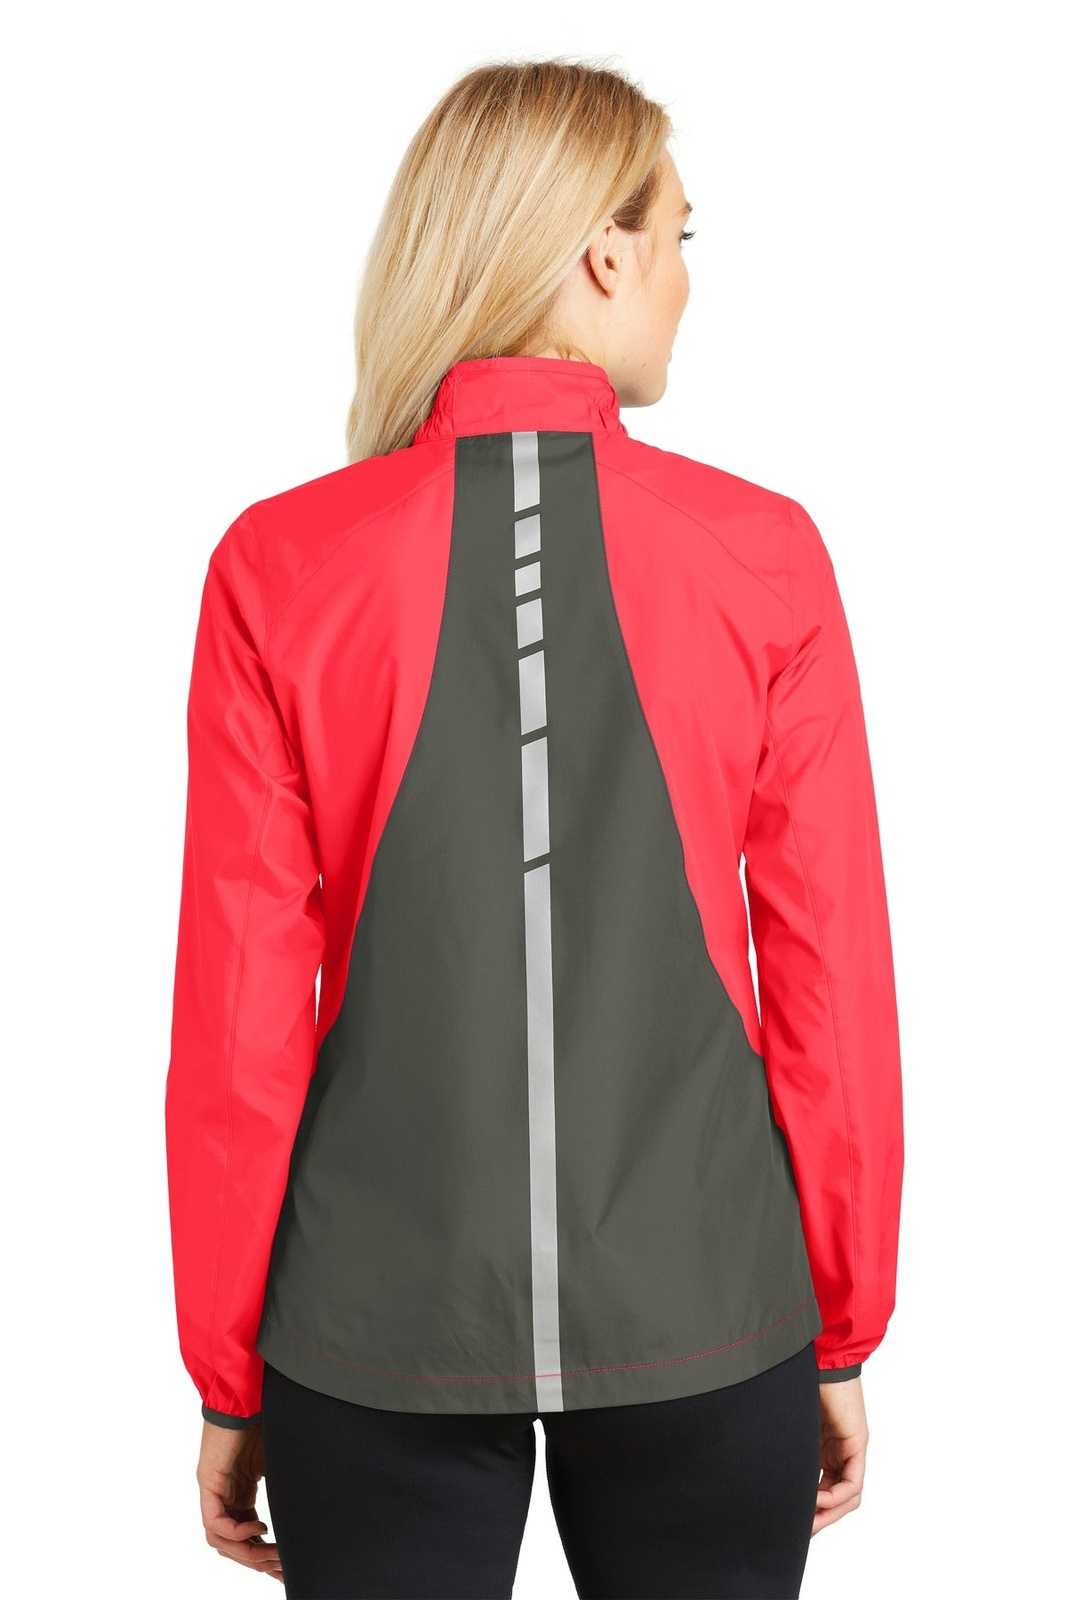 Port Authority L345 Ladies Zephyr Reflective Hit Full-Zip Jacket - Hot Coral Gray Steel - HIT a Double - 1